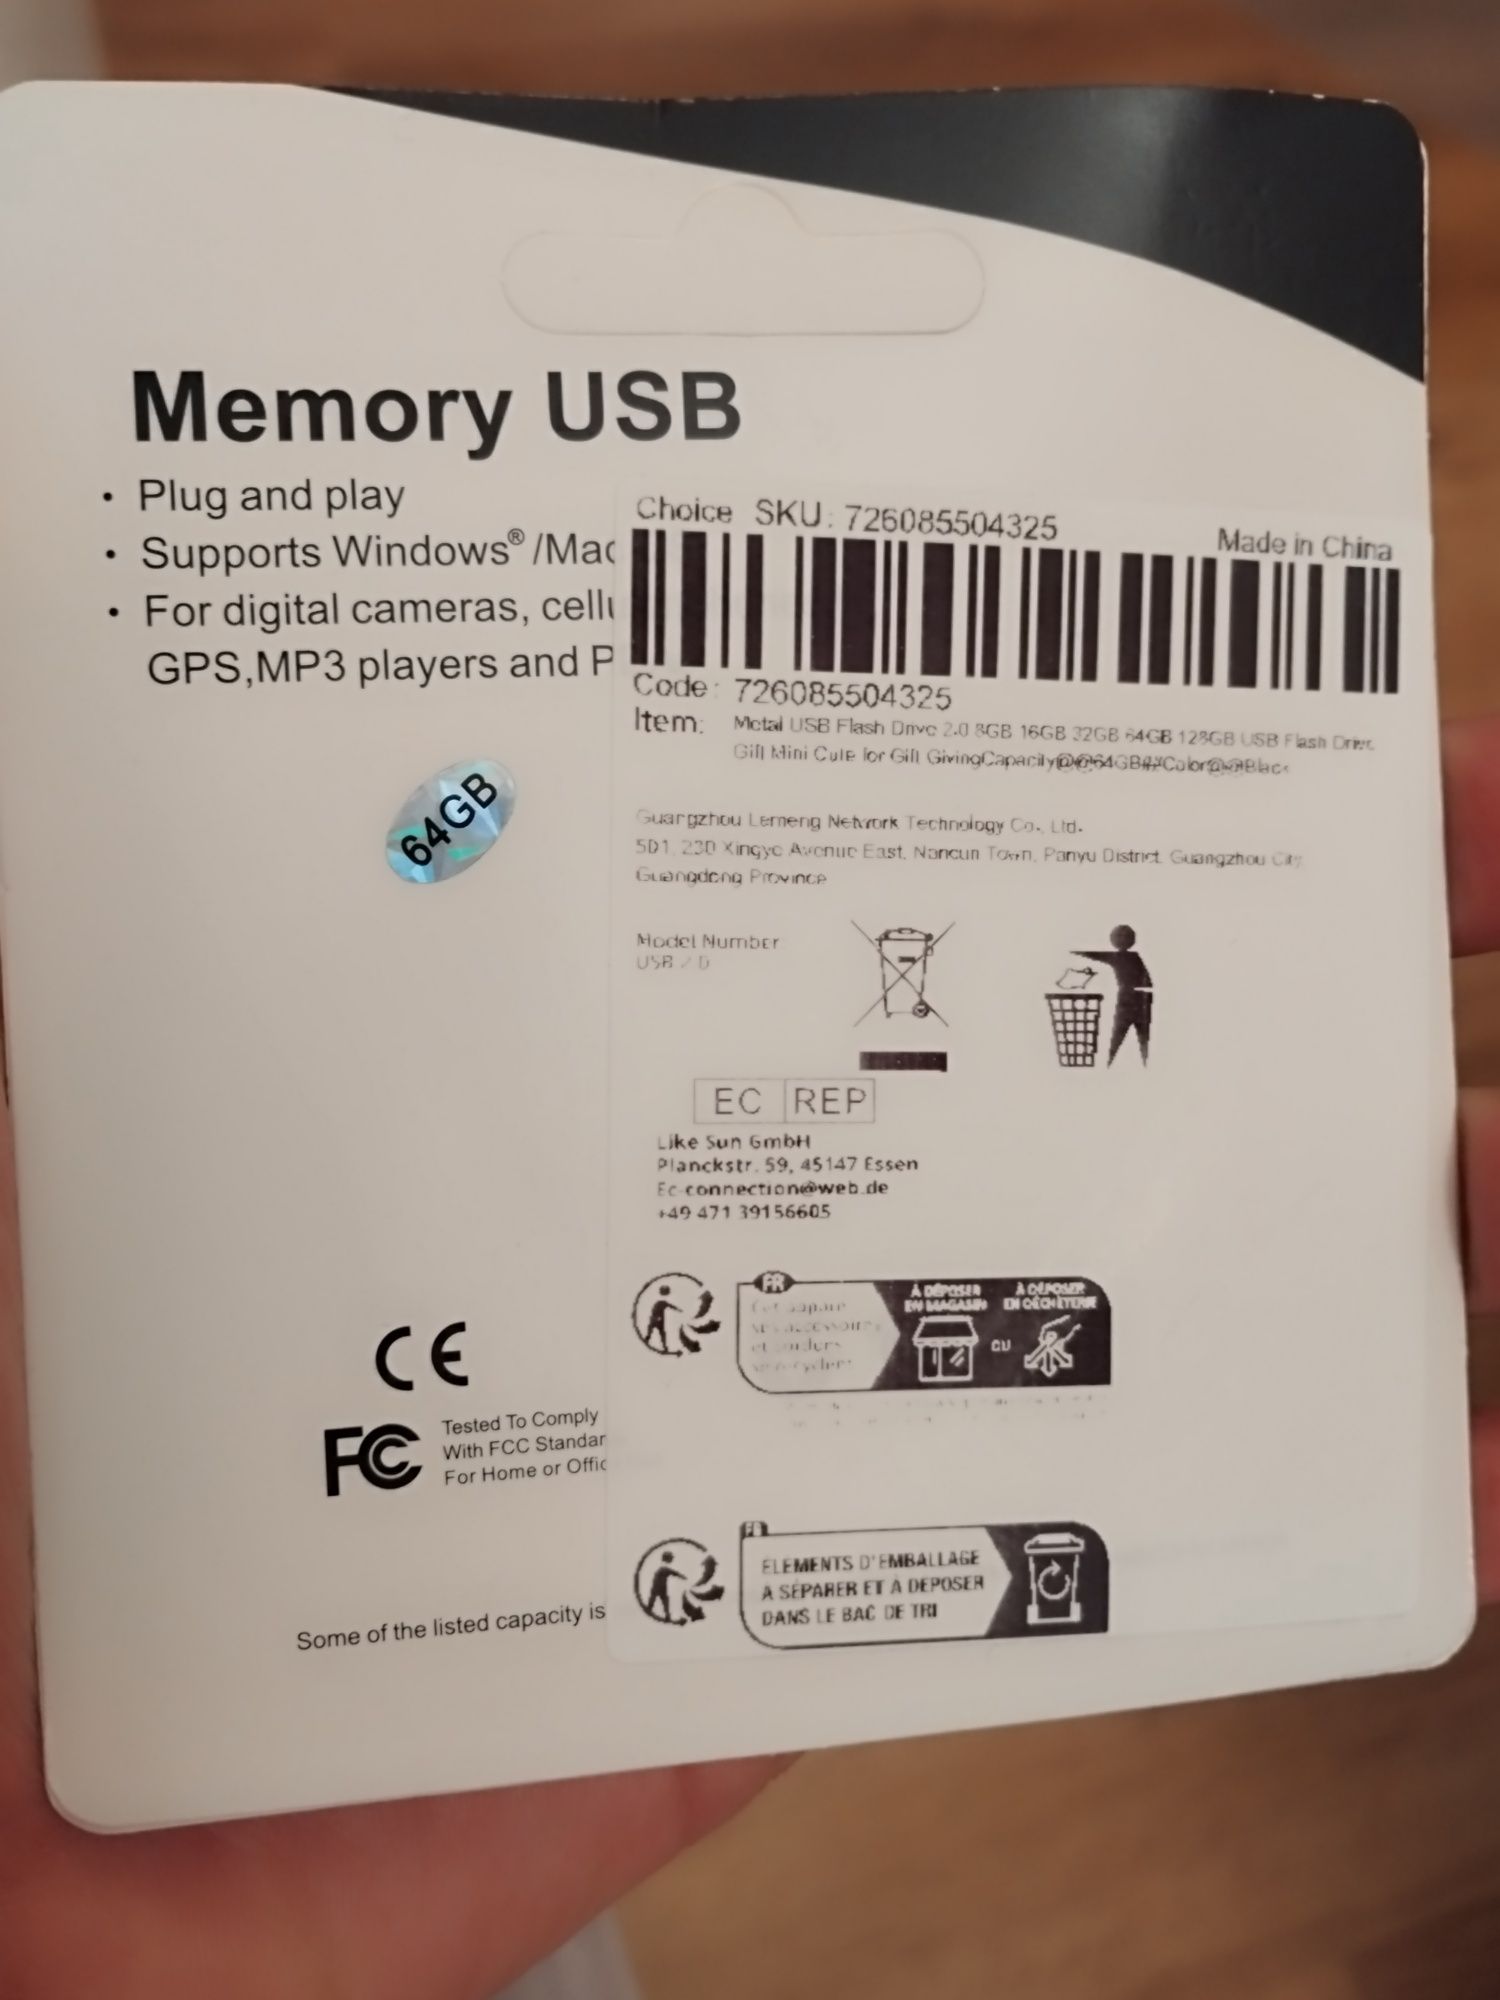 Pendrive 64 GB nowy